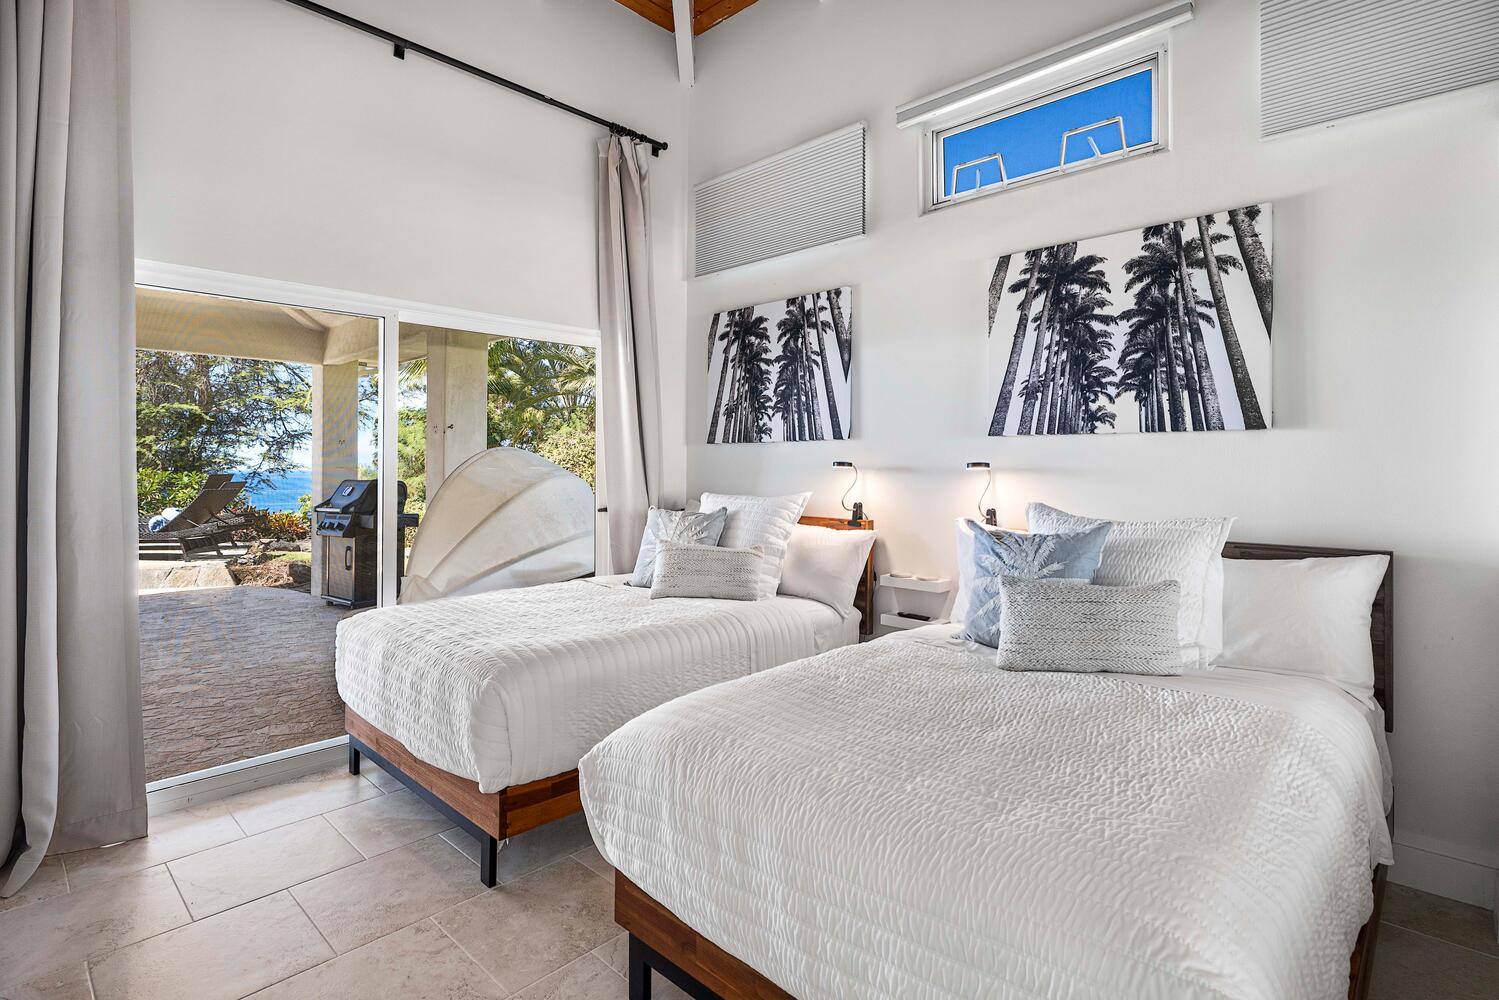 Kailua Kona Vacation Rentals, Ho'okipa Hale - Guest suite comes with two full-sized bed and an access to private lanai.